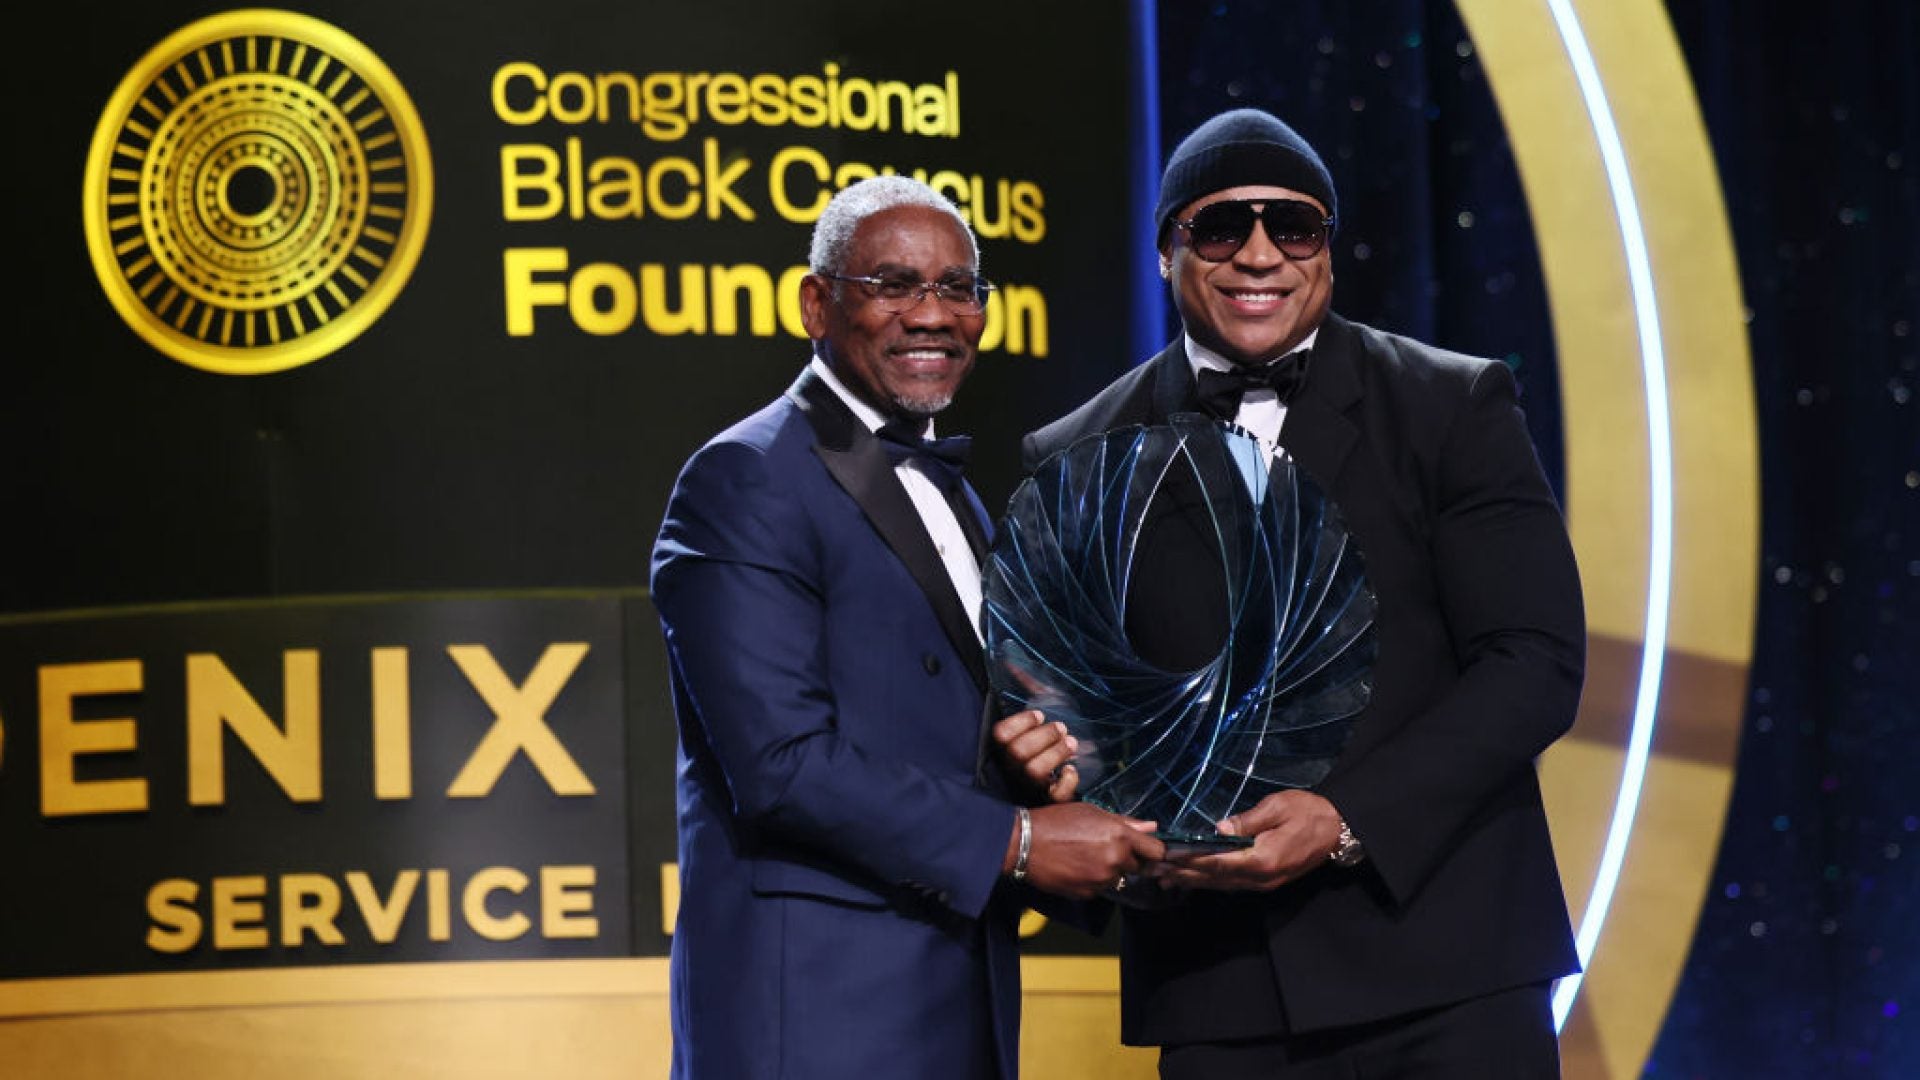 What You Missed At The Congressional Black Caucus Foundation’s 52nd Annual Legislative Conference